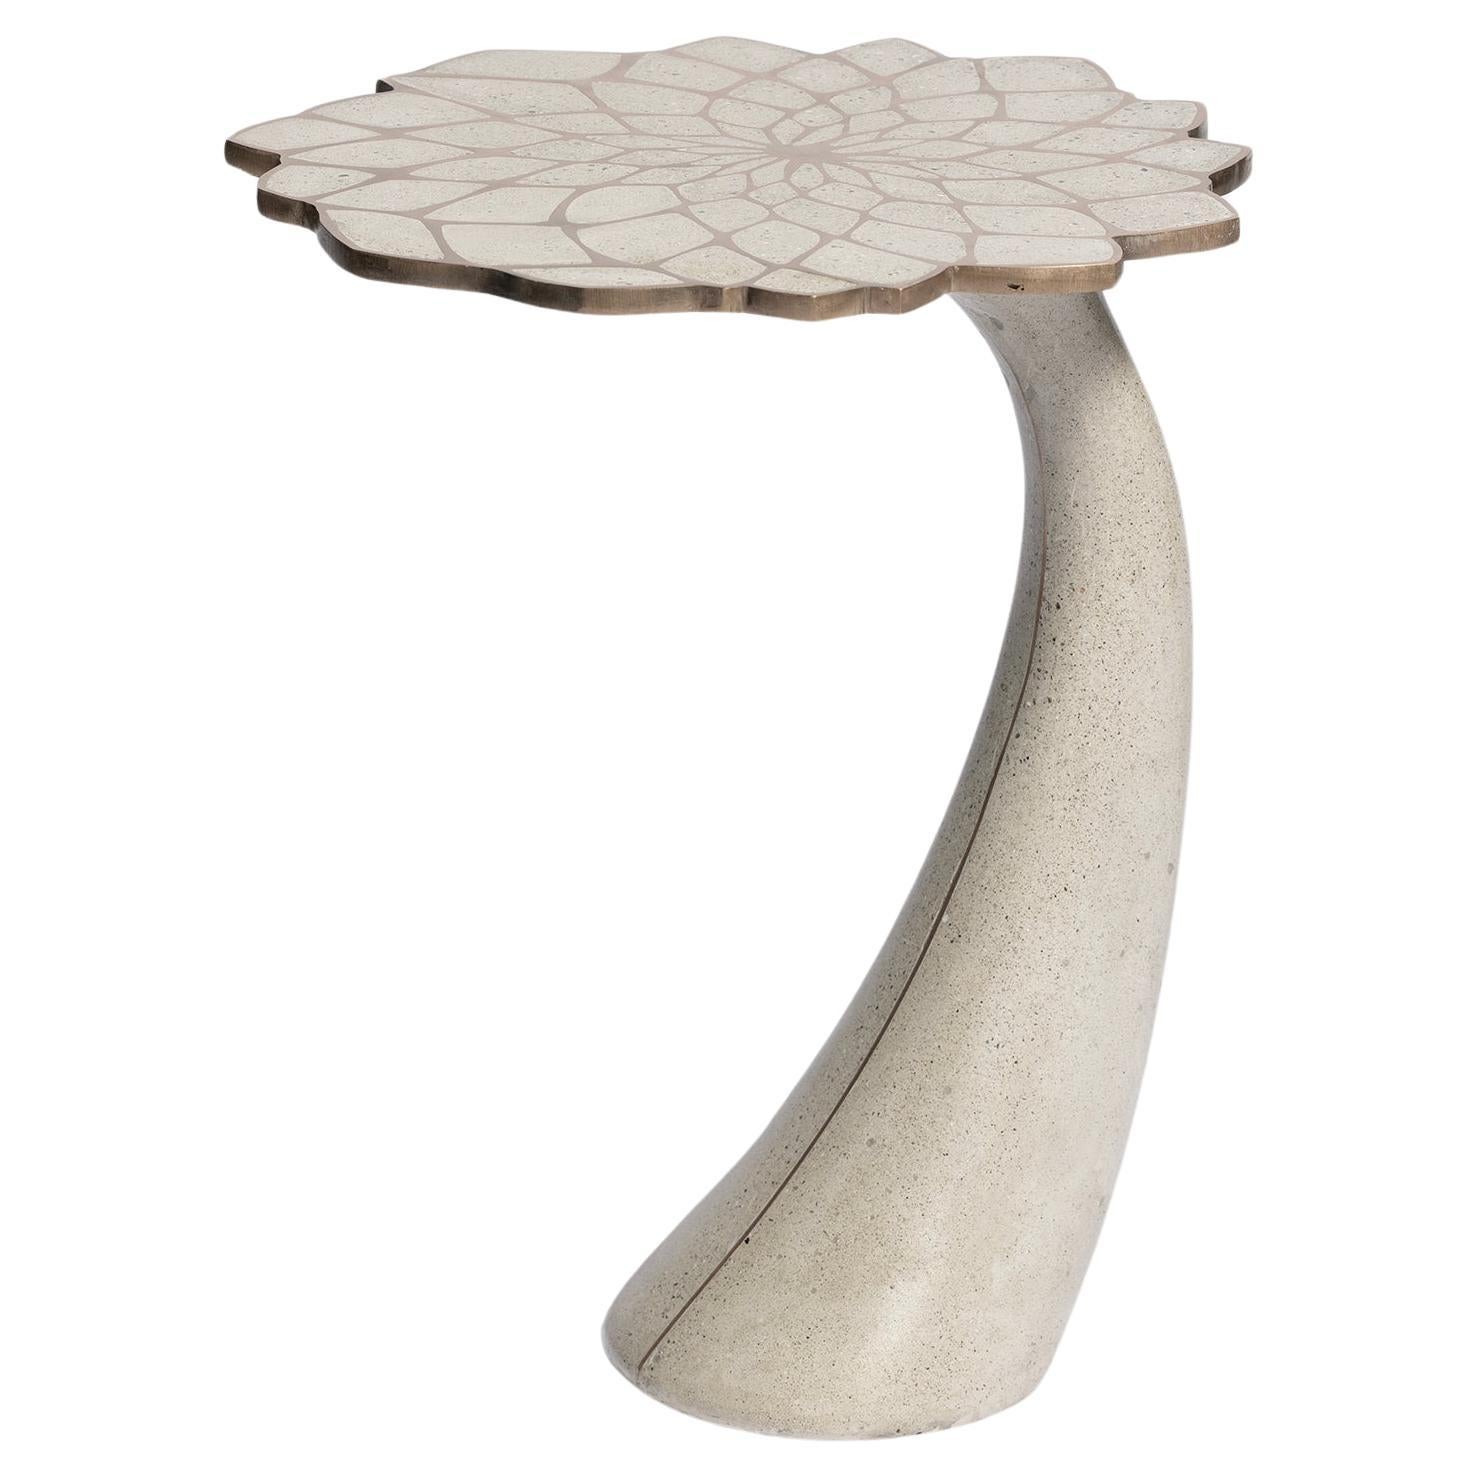 James de Wulf Exo Mosaic Lily Side Table For Sale